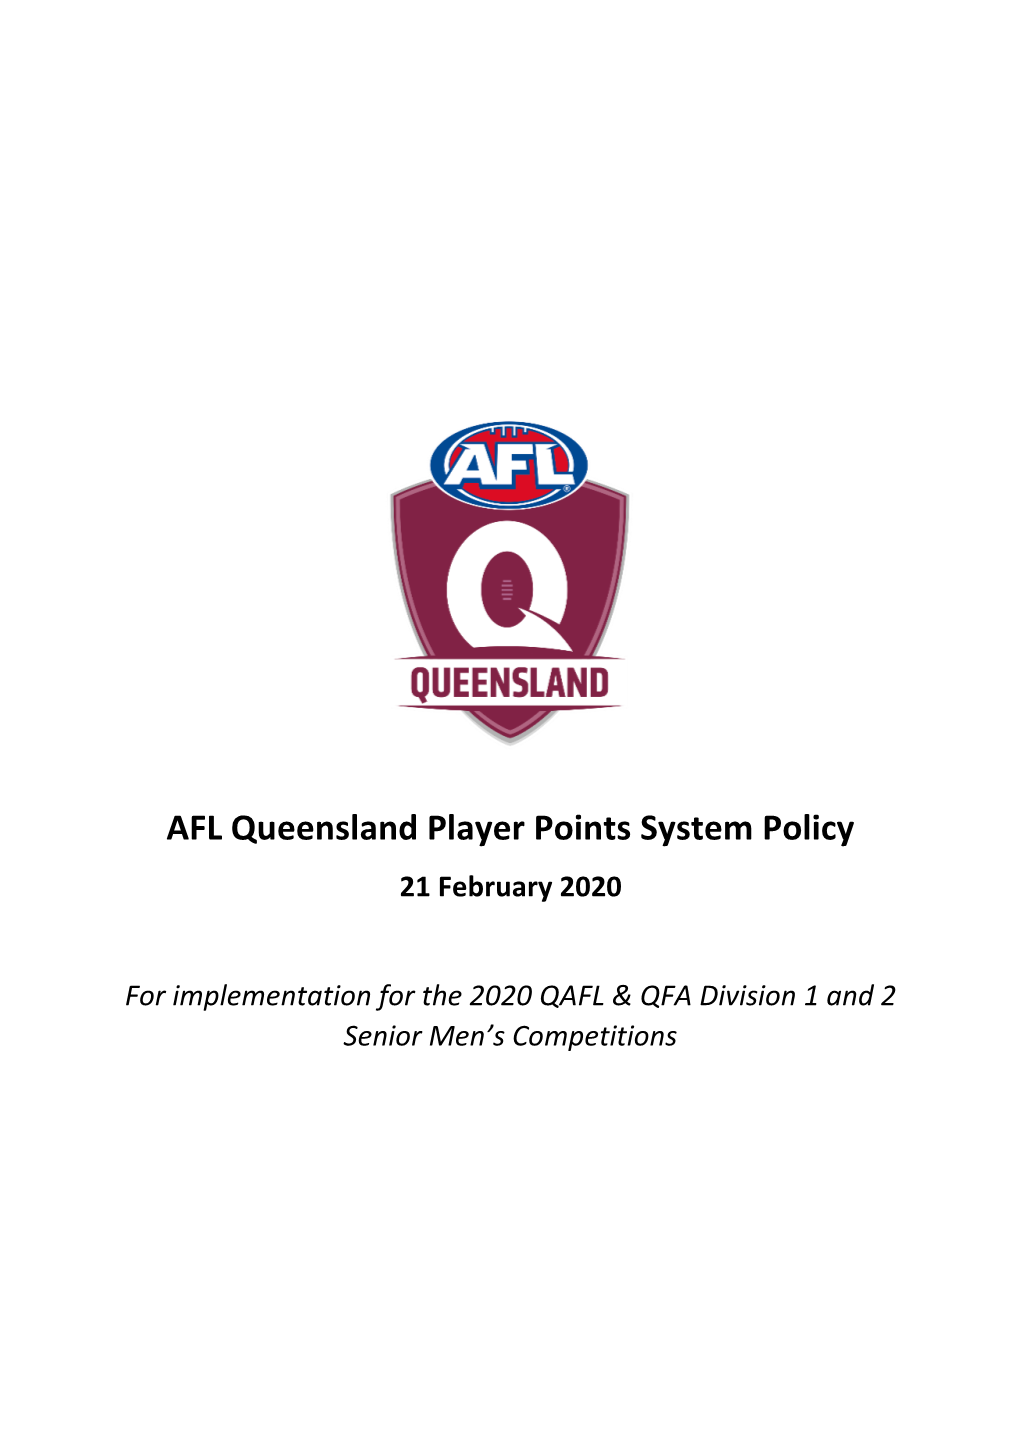 Player Points System Policy 21 February 2020